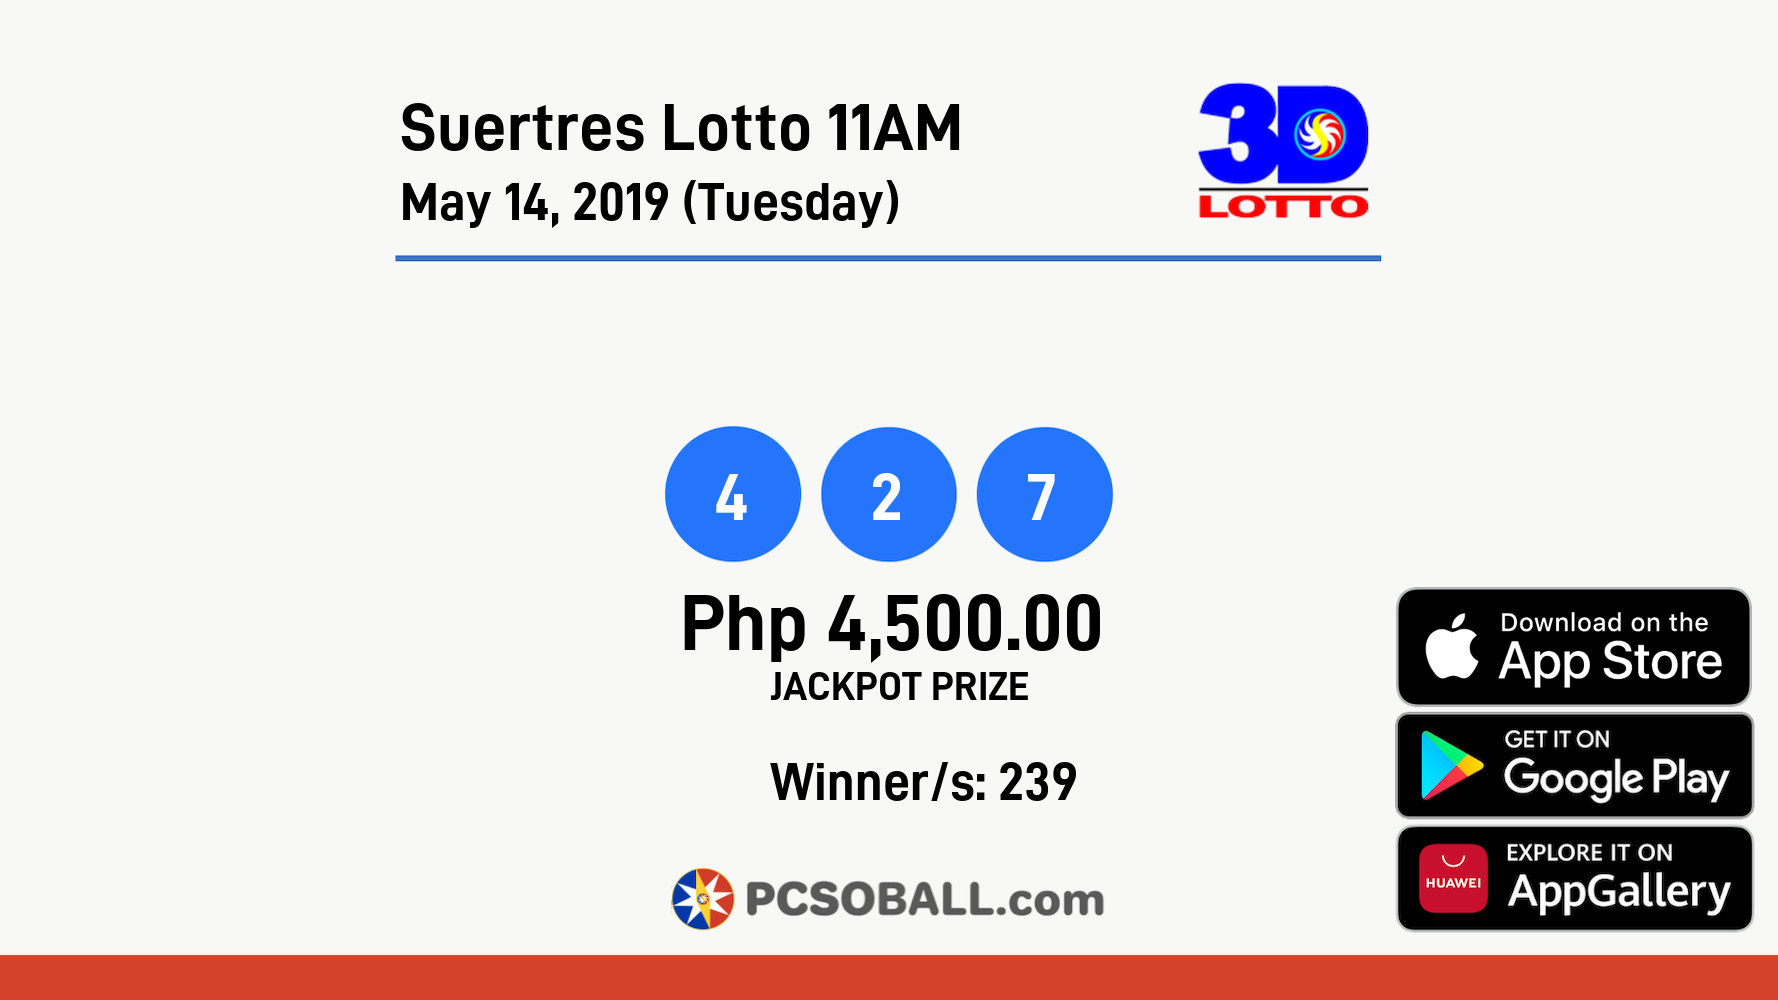 Suertres Lotto 11AM May 14, 2019 (Tuesday) Result